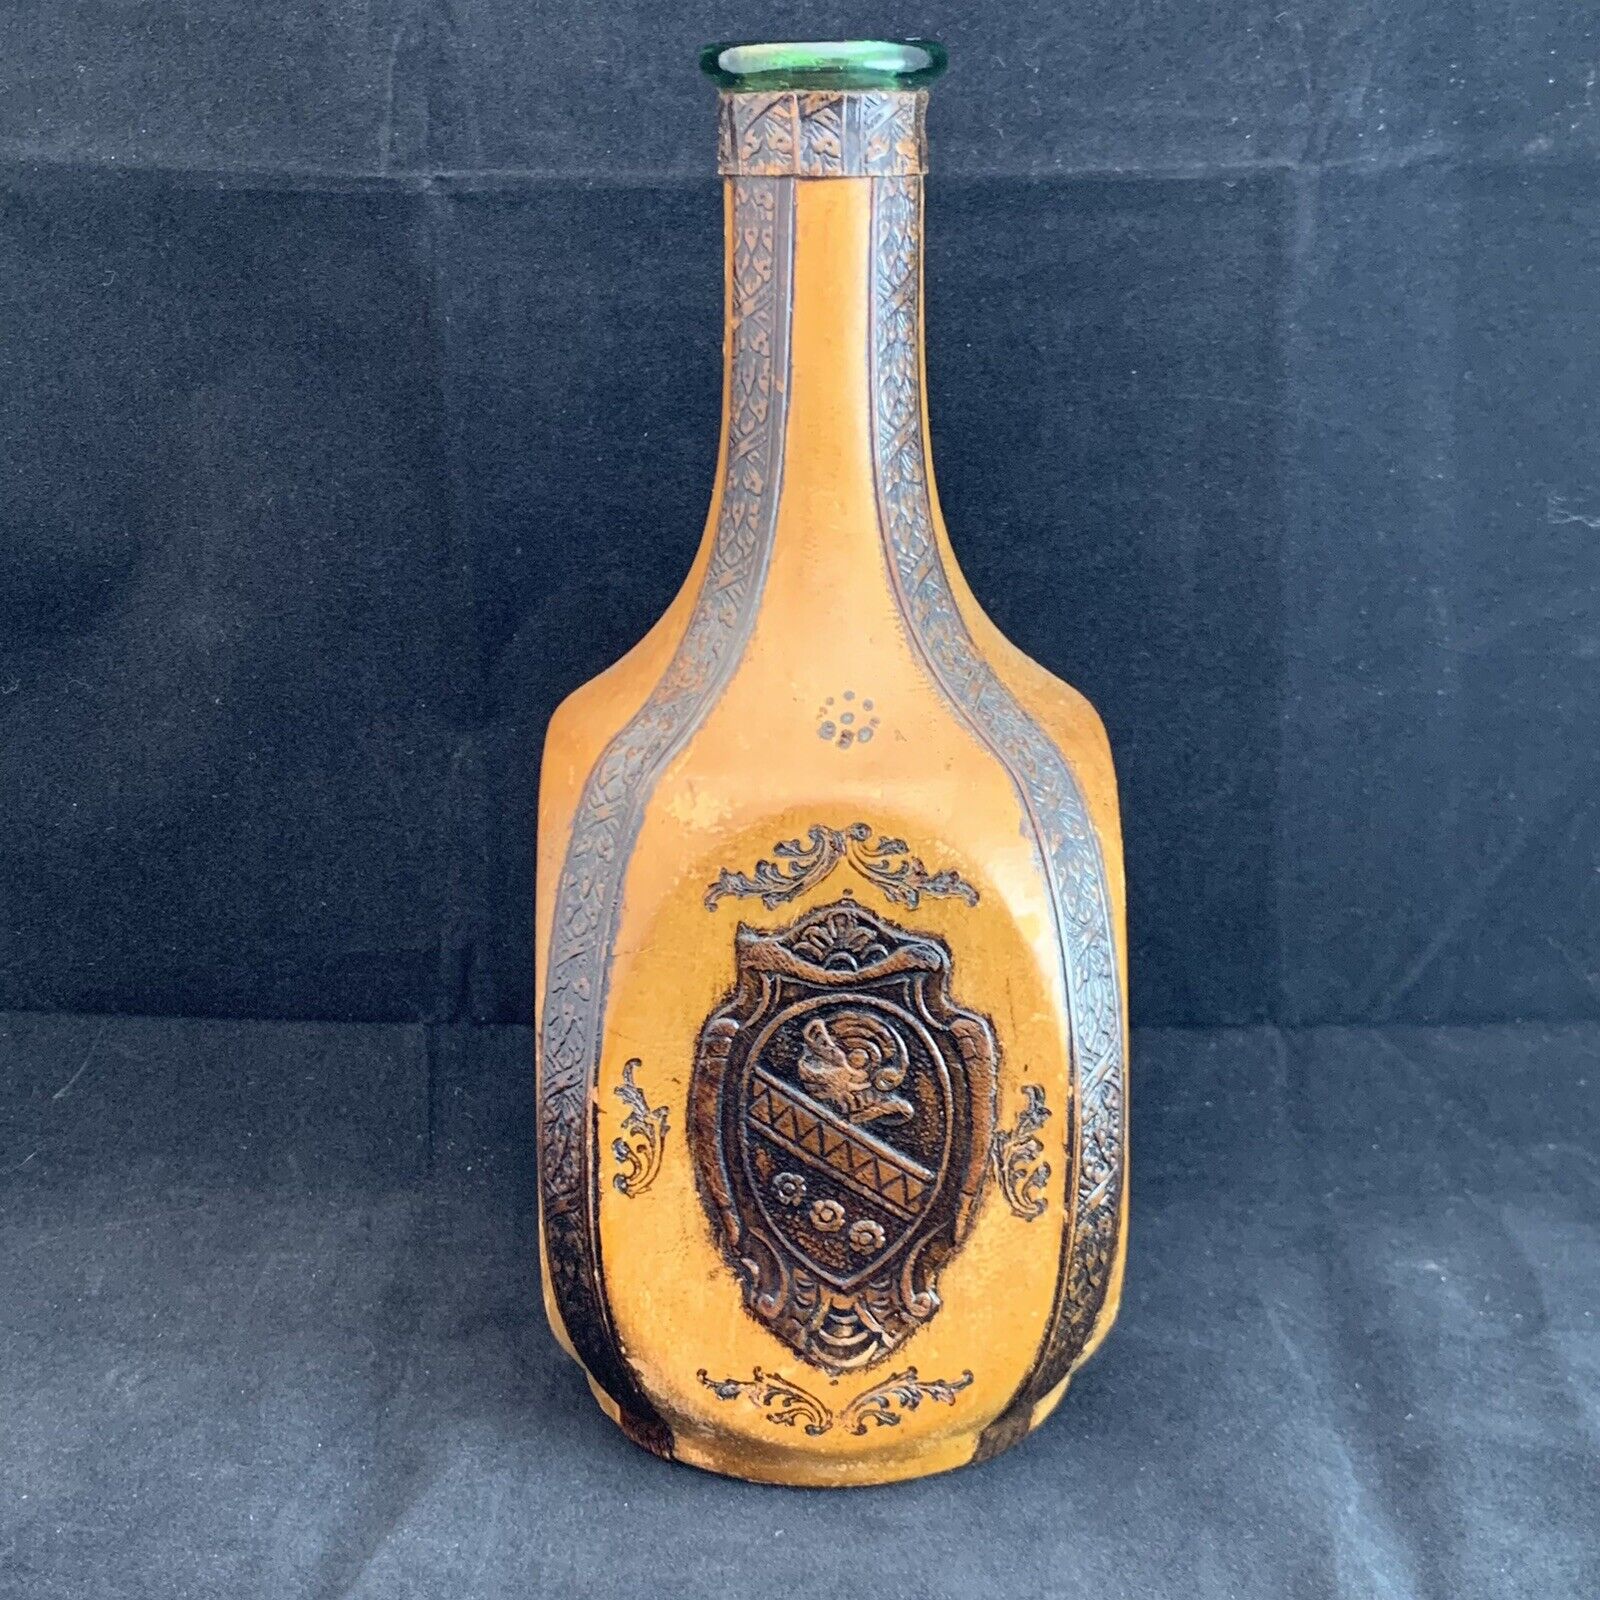 Vintage Italian Hand Tooled Leather Wrapped Decanter Bottle Green Glass